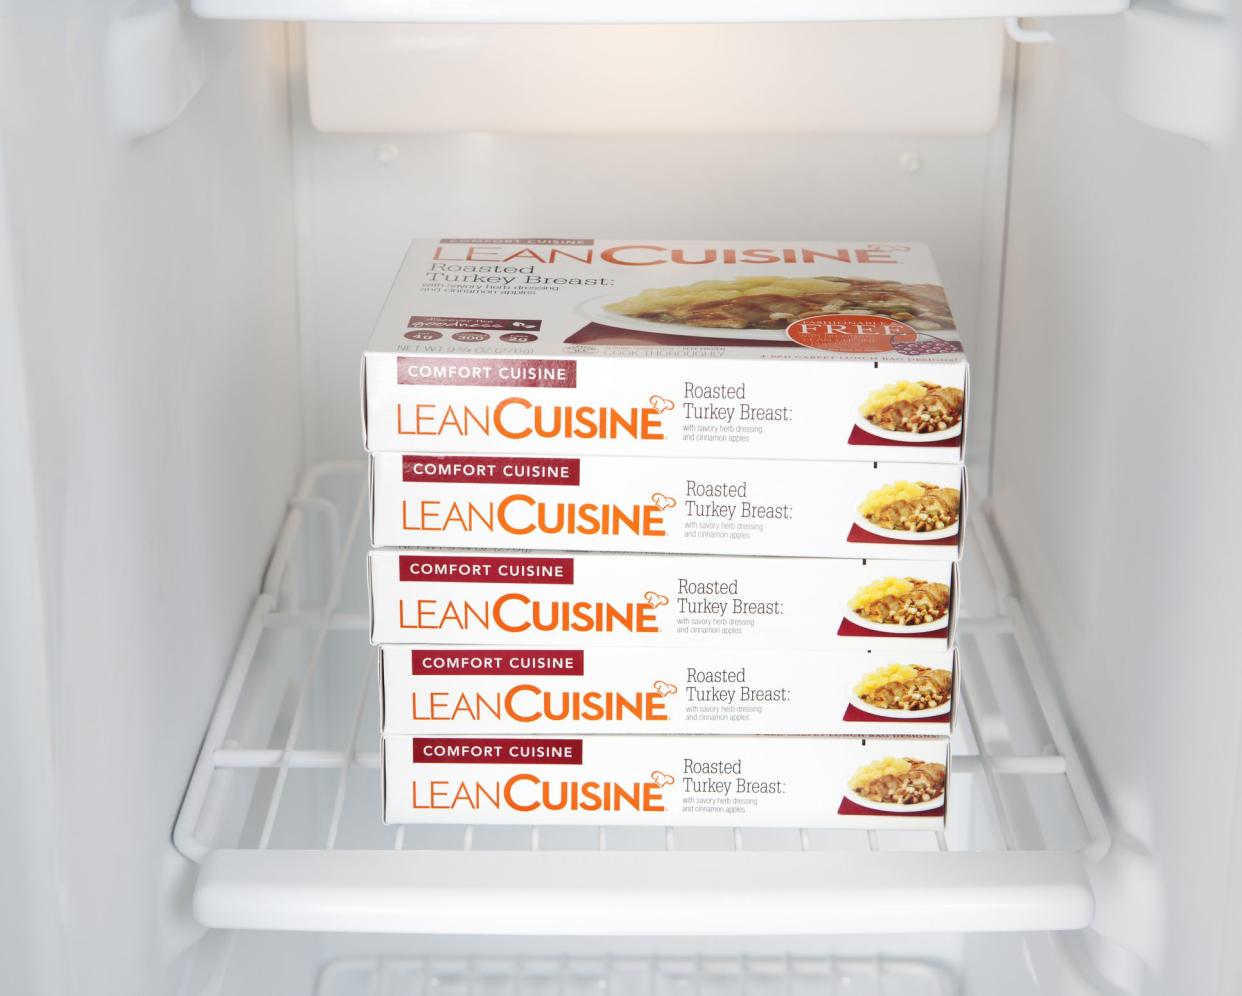 Chillicothe, Ohio, USA - March 15th, 2011: Lean Cuisine Roasted Turkey Breast frozen dinner, distributed by Nestle, in a residential freezer.